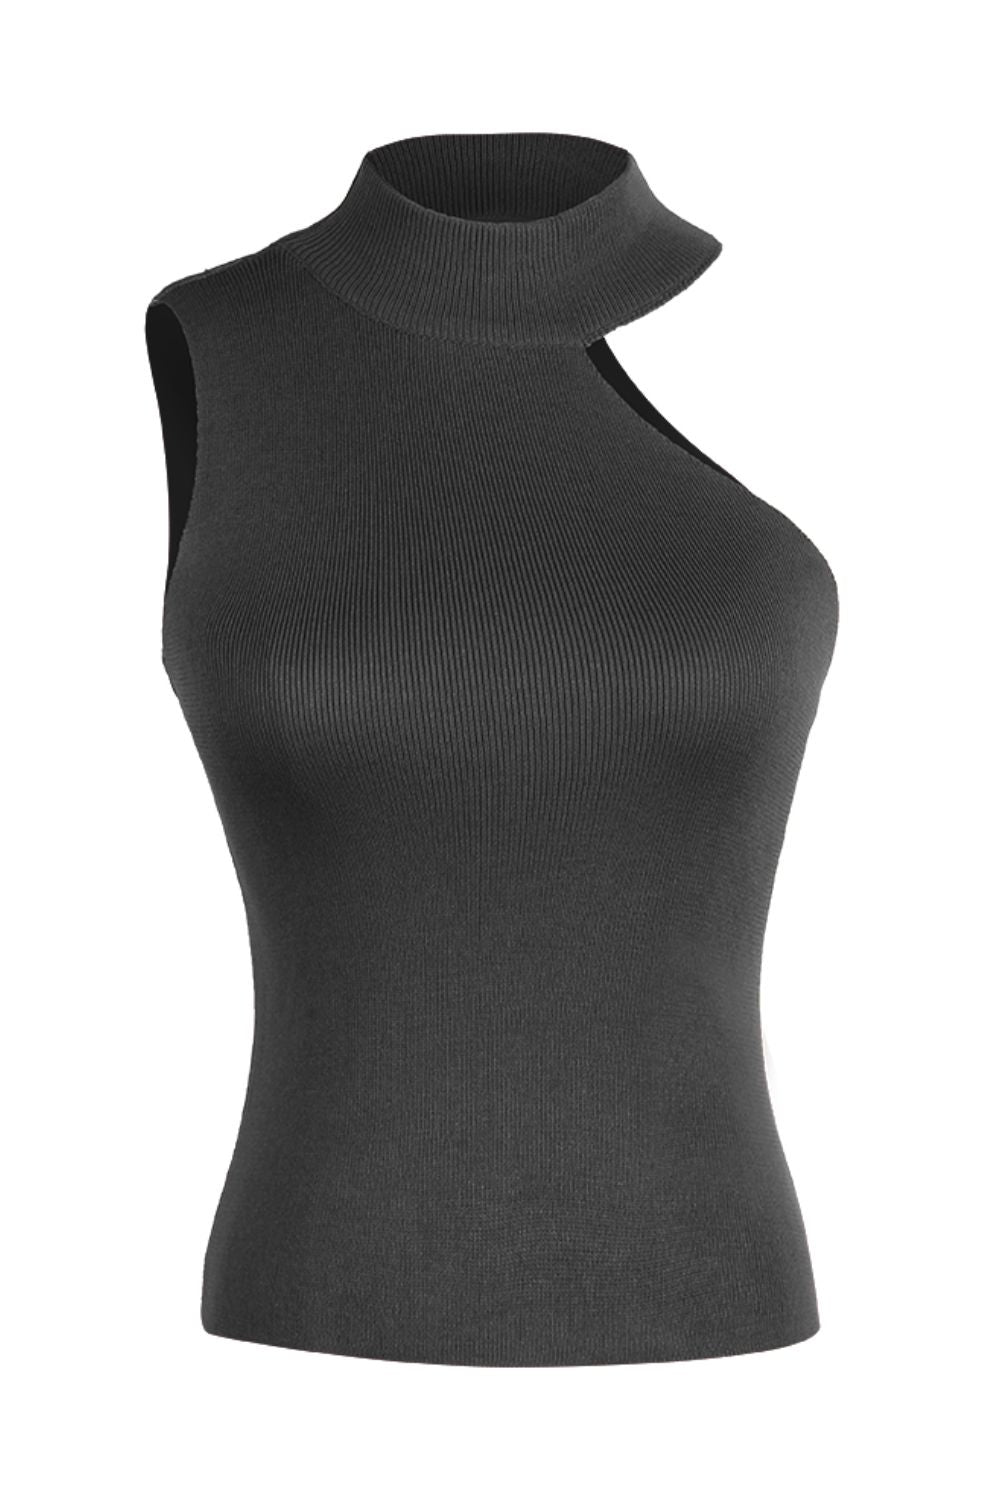 Unleash Your Inner Goddess with Our Asymmetrical Sleeveless Rib-Knit Top - Embrace Confidence, Style and Sensuality - Guy Christopher 